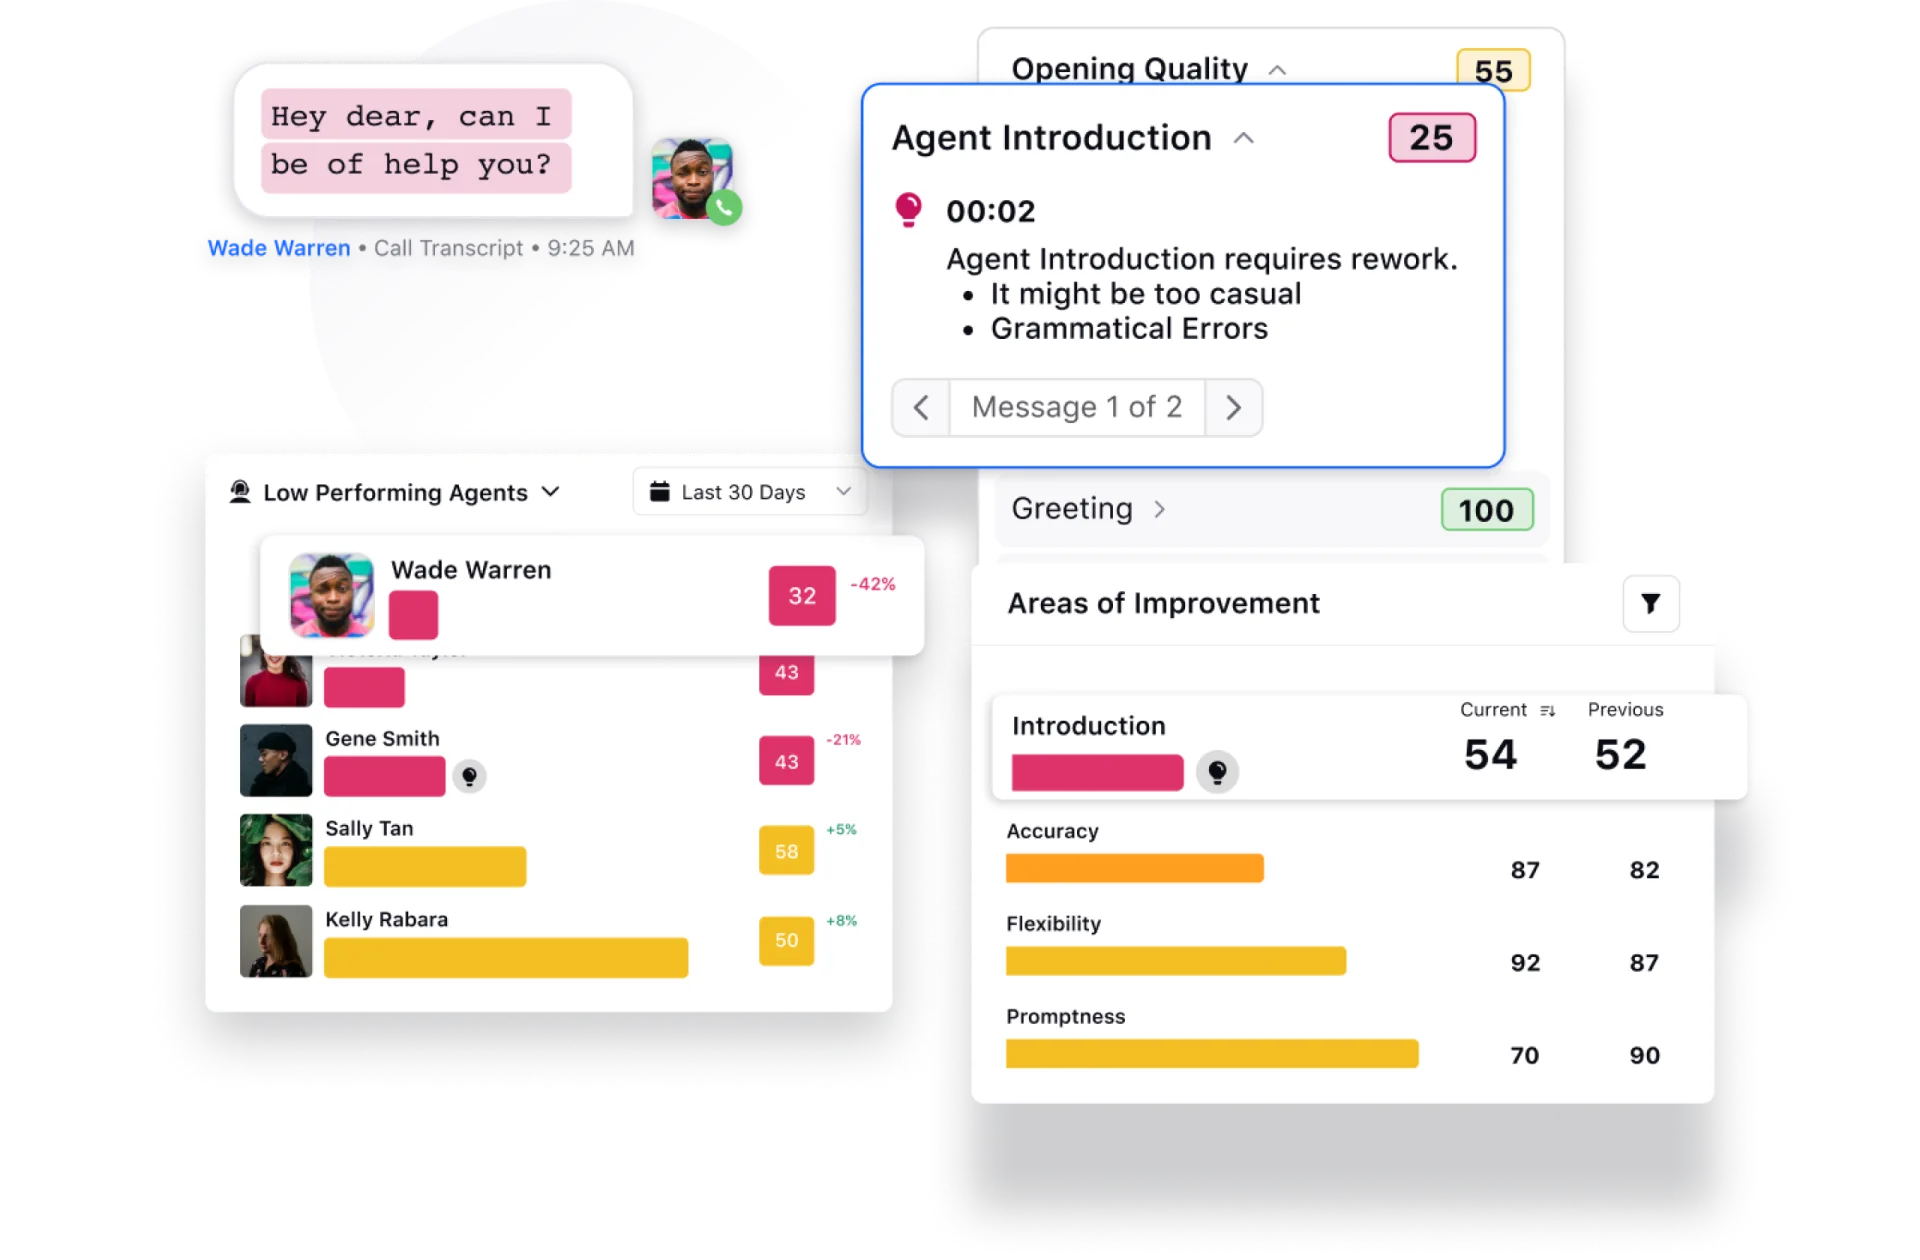 AI scoring in Sprinklr's Quality Management software